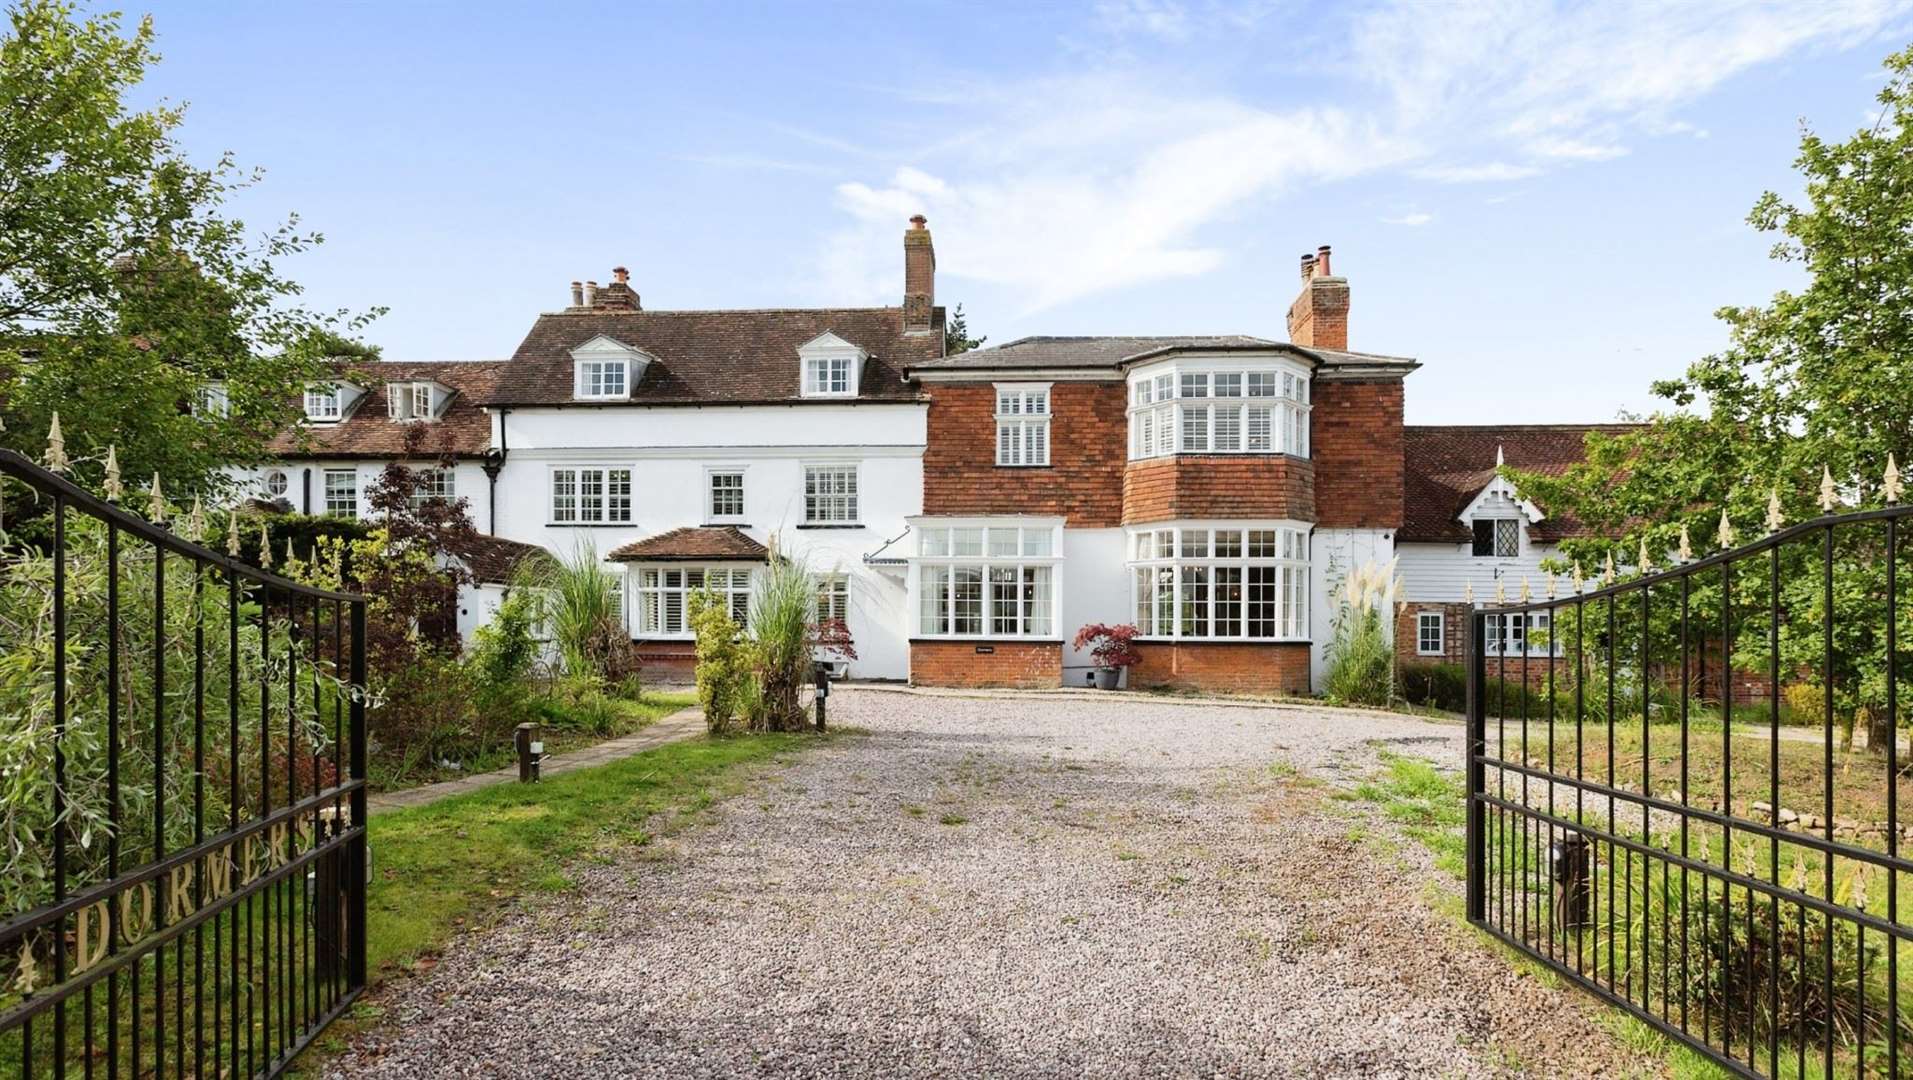 This nine-bedroom property is on the market for £2.75m. Picture: Yopa